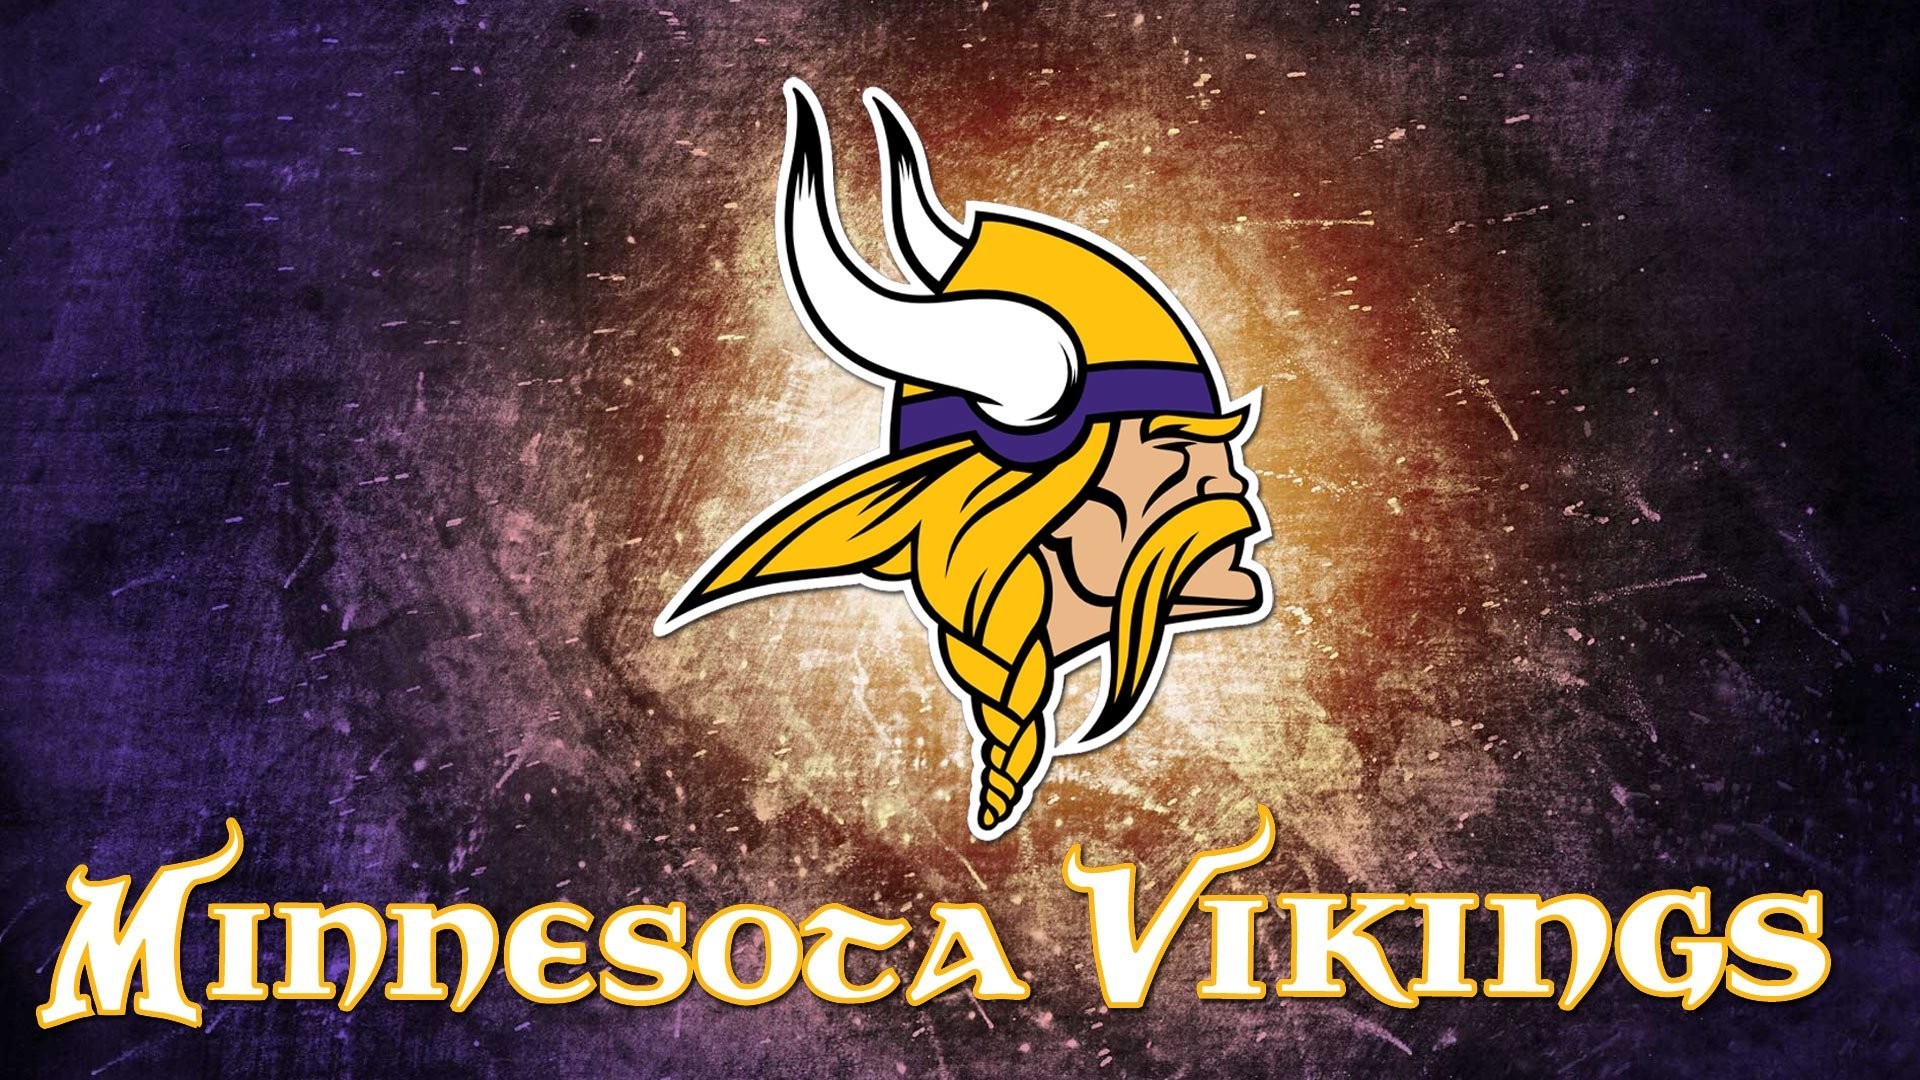 Minnesota Vikings NFL Desktop Wallpapers with high-resolution 1920x1080 pixel. You can use this wallpaper for your Mac or Windows Desktop Background, iPhone, Android or Tablet and another Smartphone device